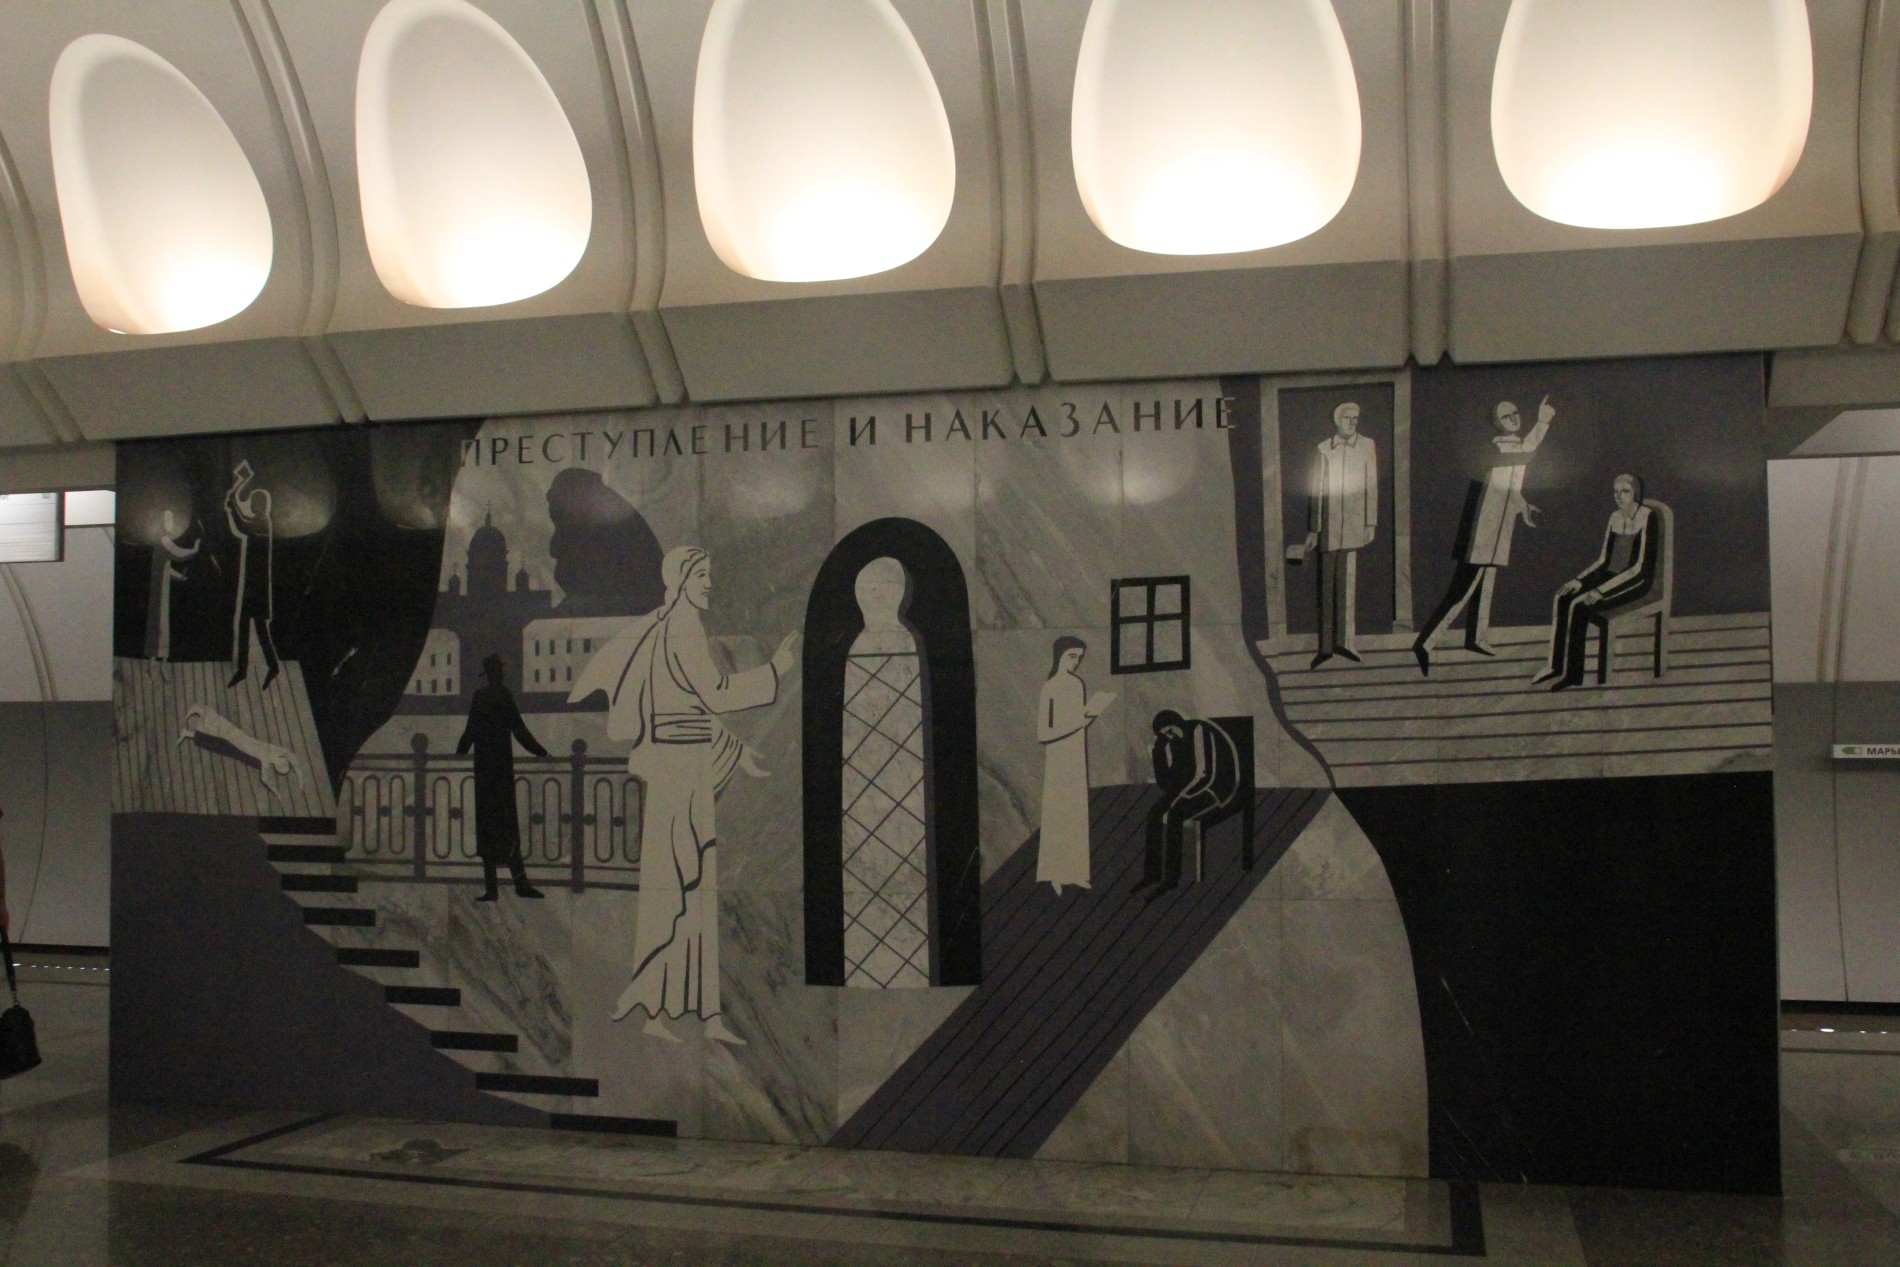 A mural in the Dostoyevskaya Moscow Metro depicts a scene from Crime and Punishment, in which the lead character Raskolnikov murders two women with an axe.